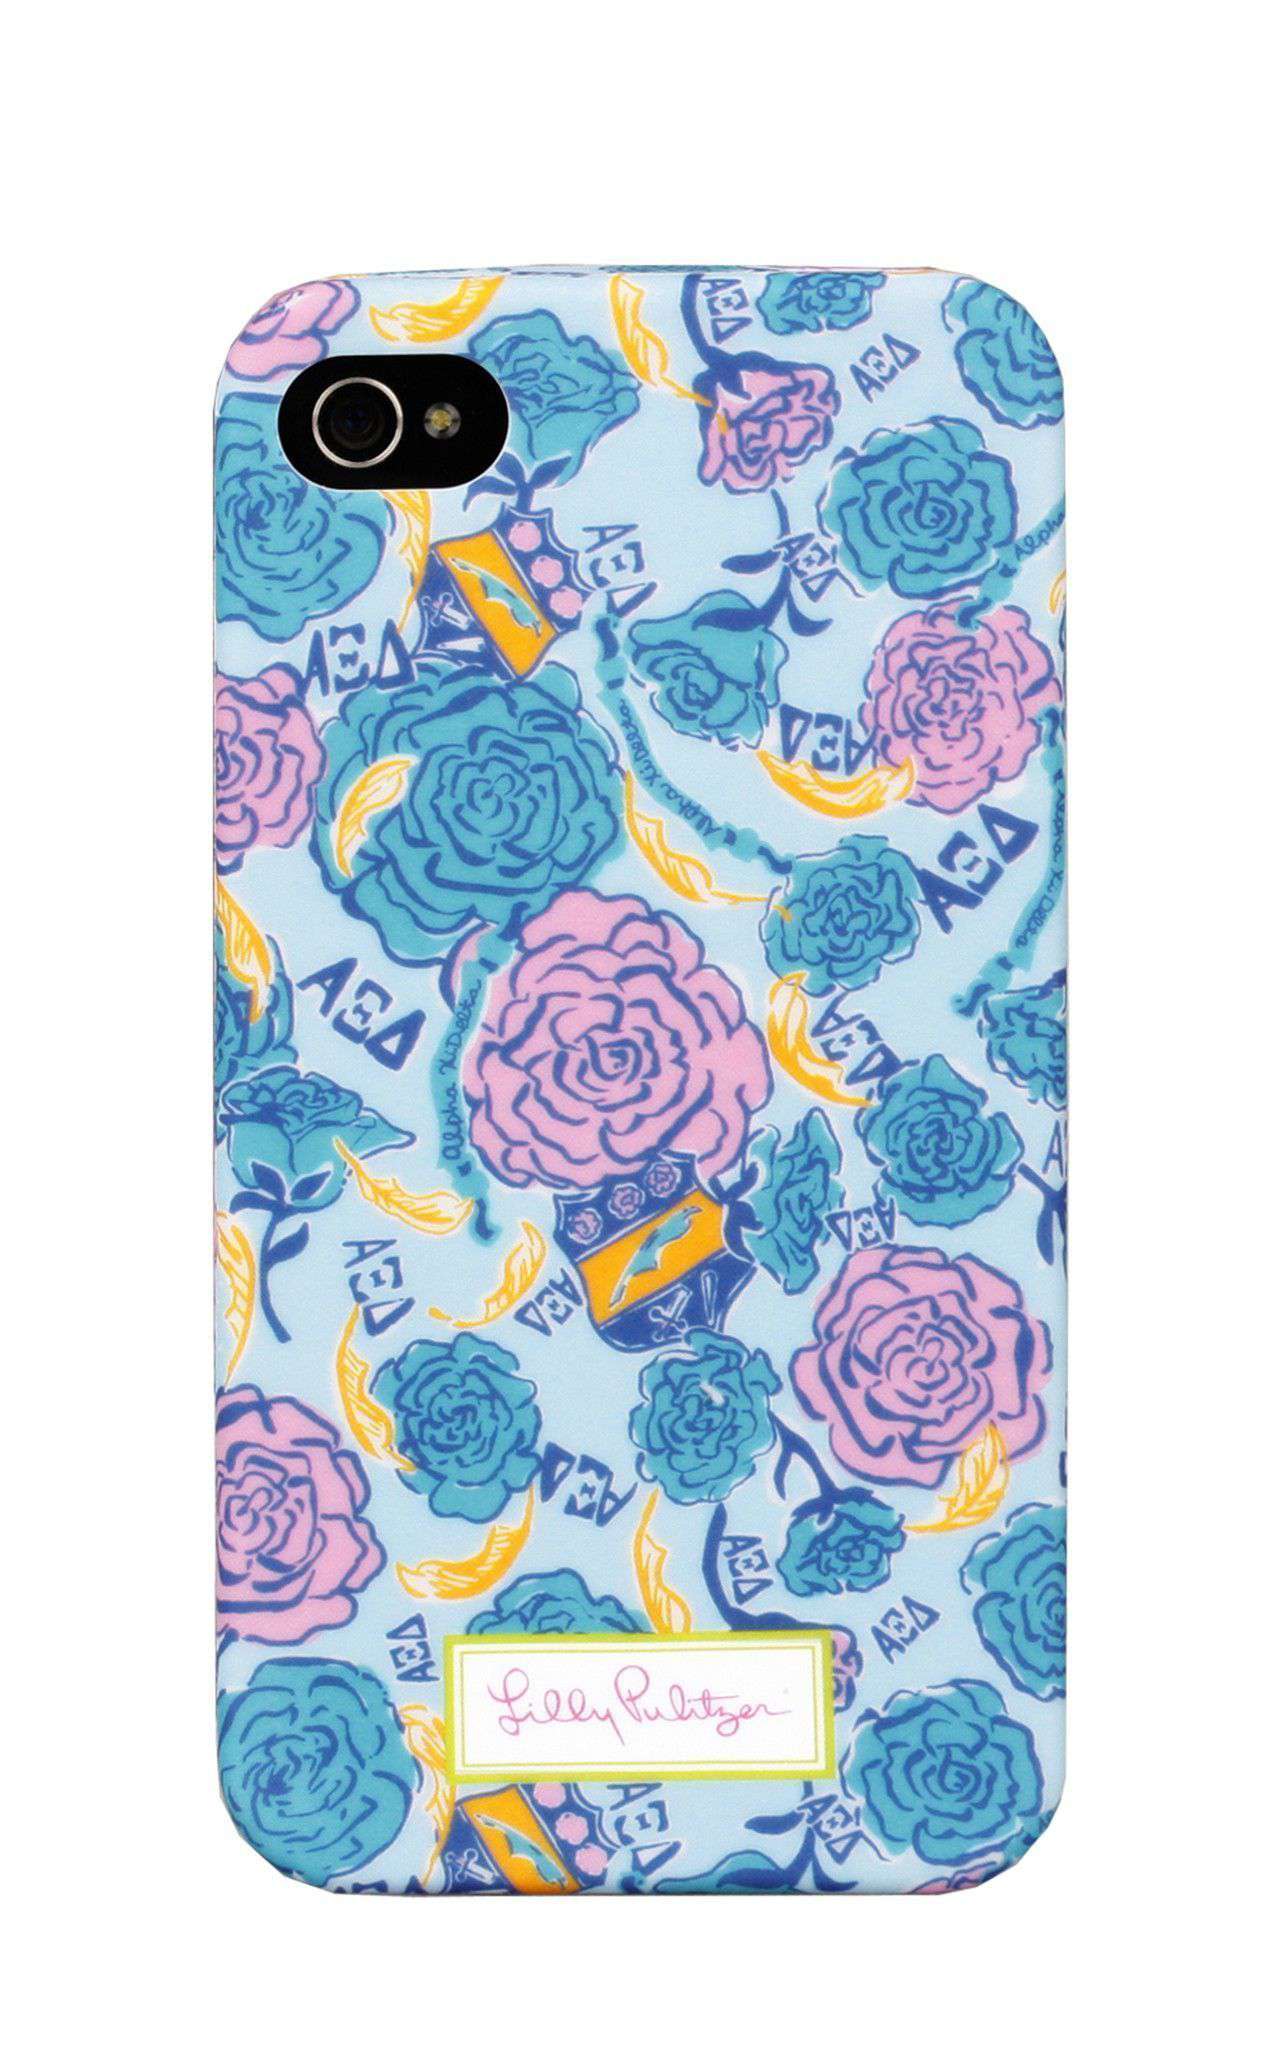 Alpha Xi Delta iPhone 4/4s Cover by Lilly Pulitzer - Country Club Prep